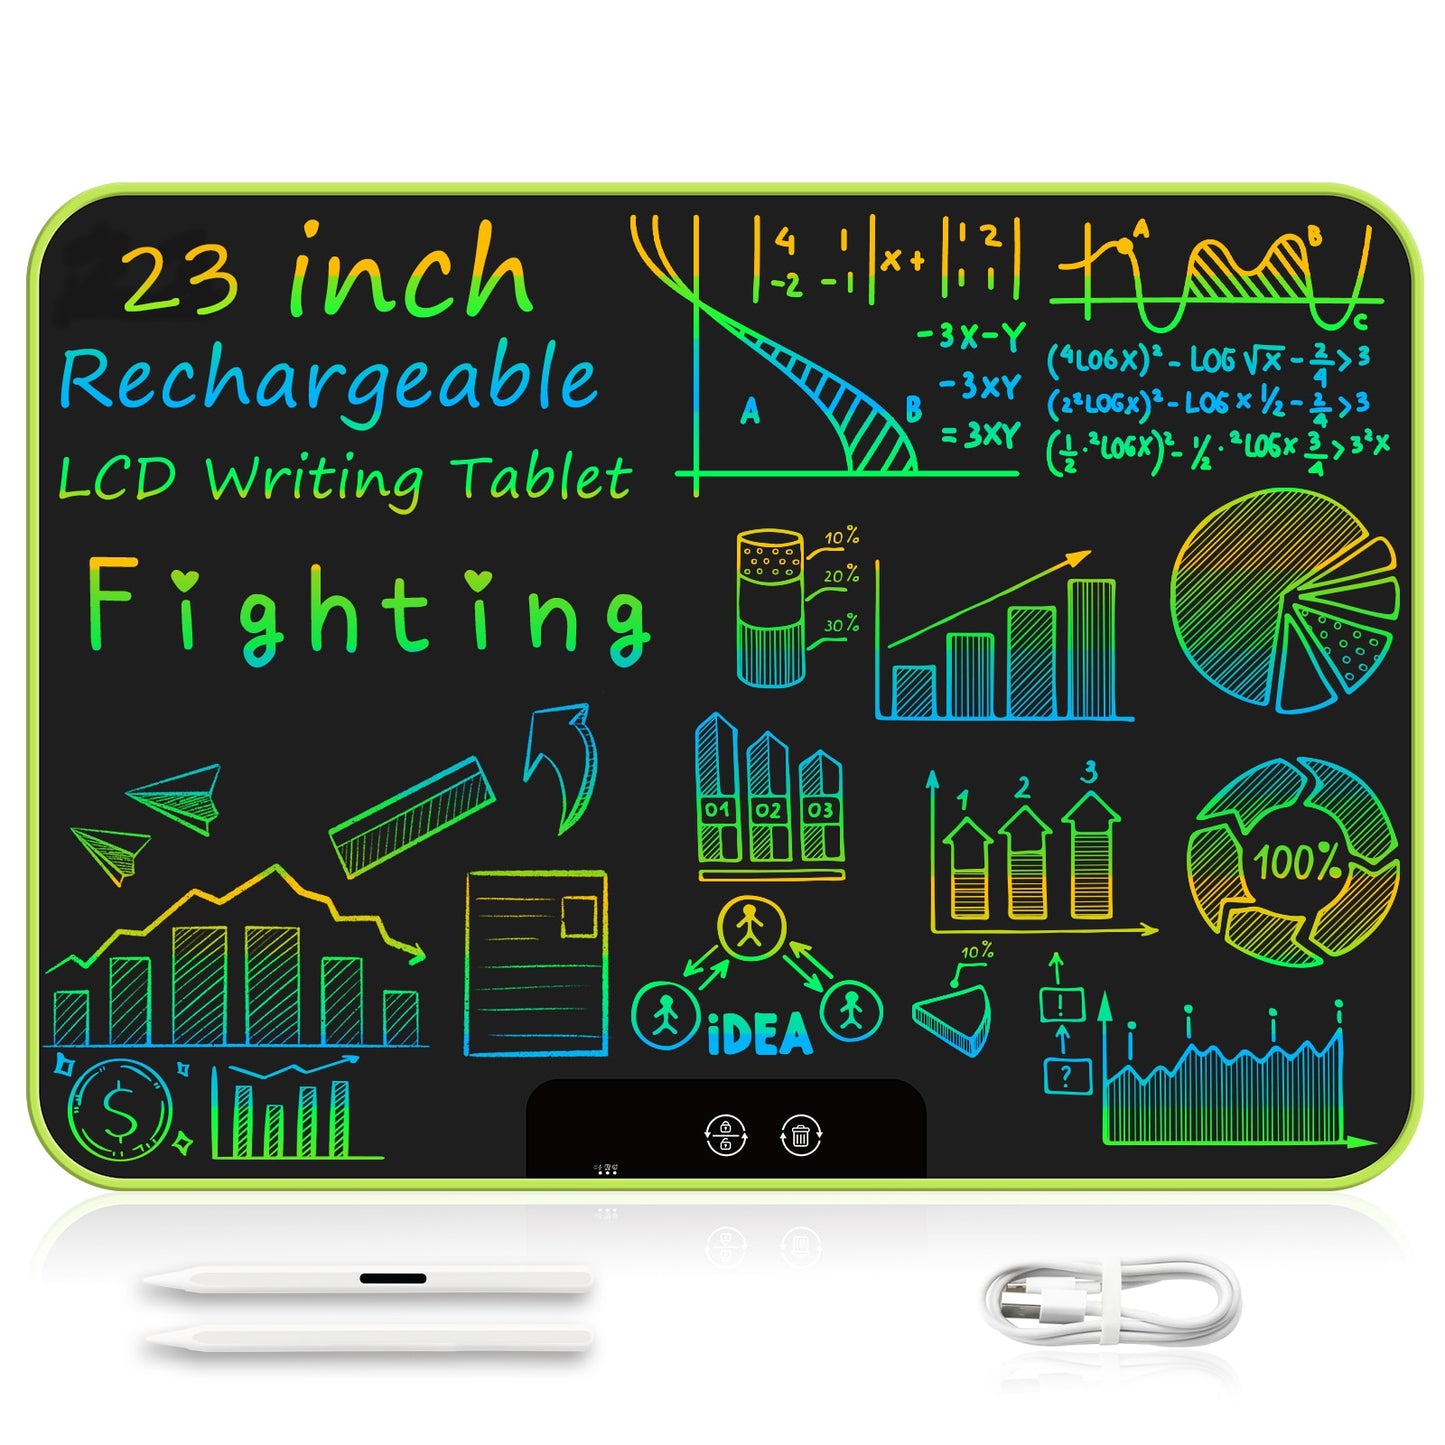 18 23 Inch LCD Writing Drawing Tablet Rechargeable Digital Colorful Graphics Handwriting Pad Kid Portable Electronic Sketchpad